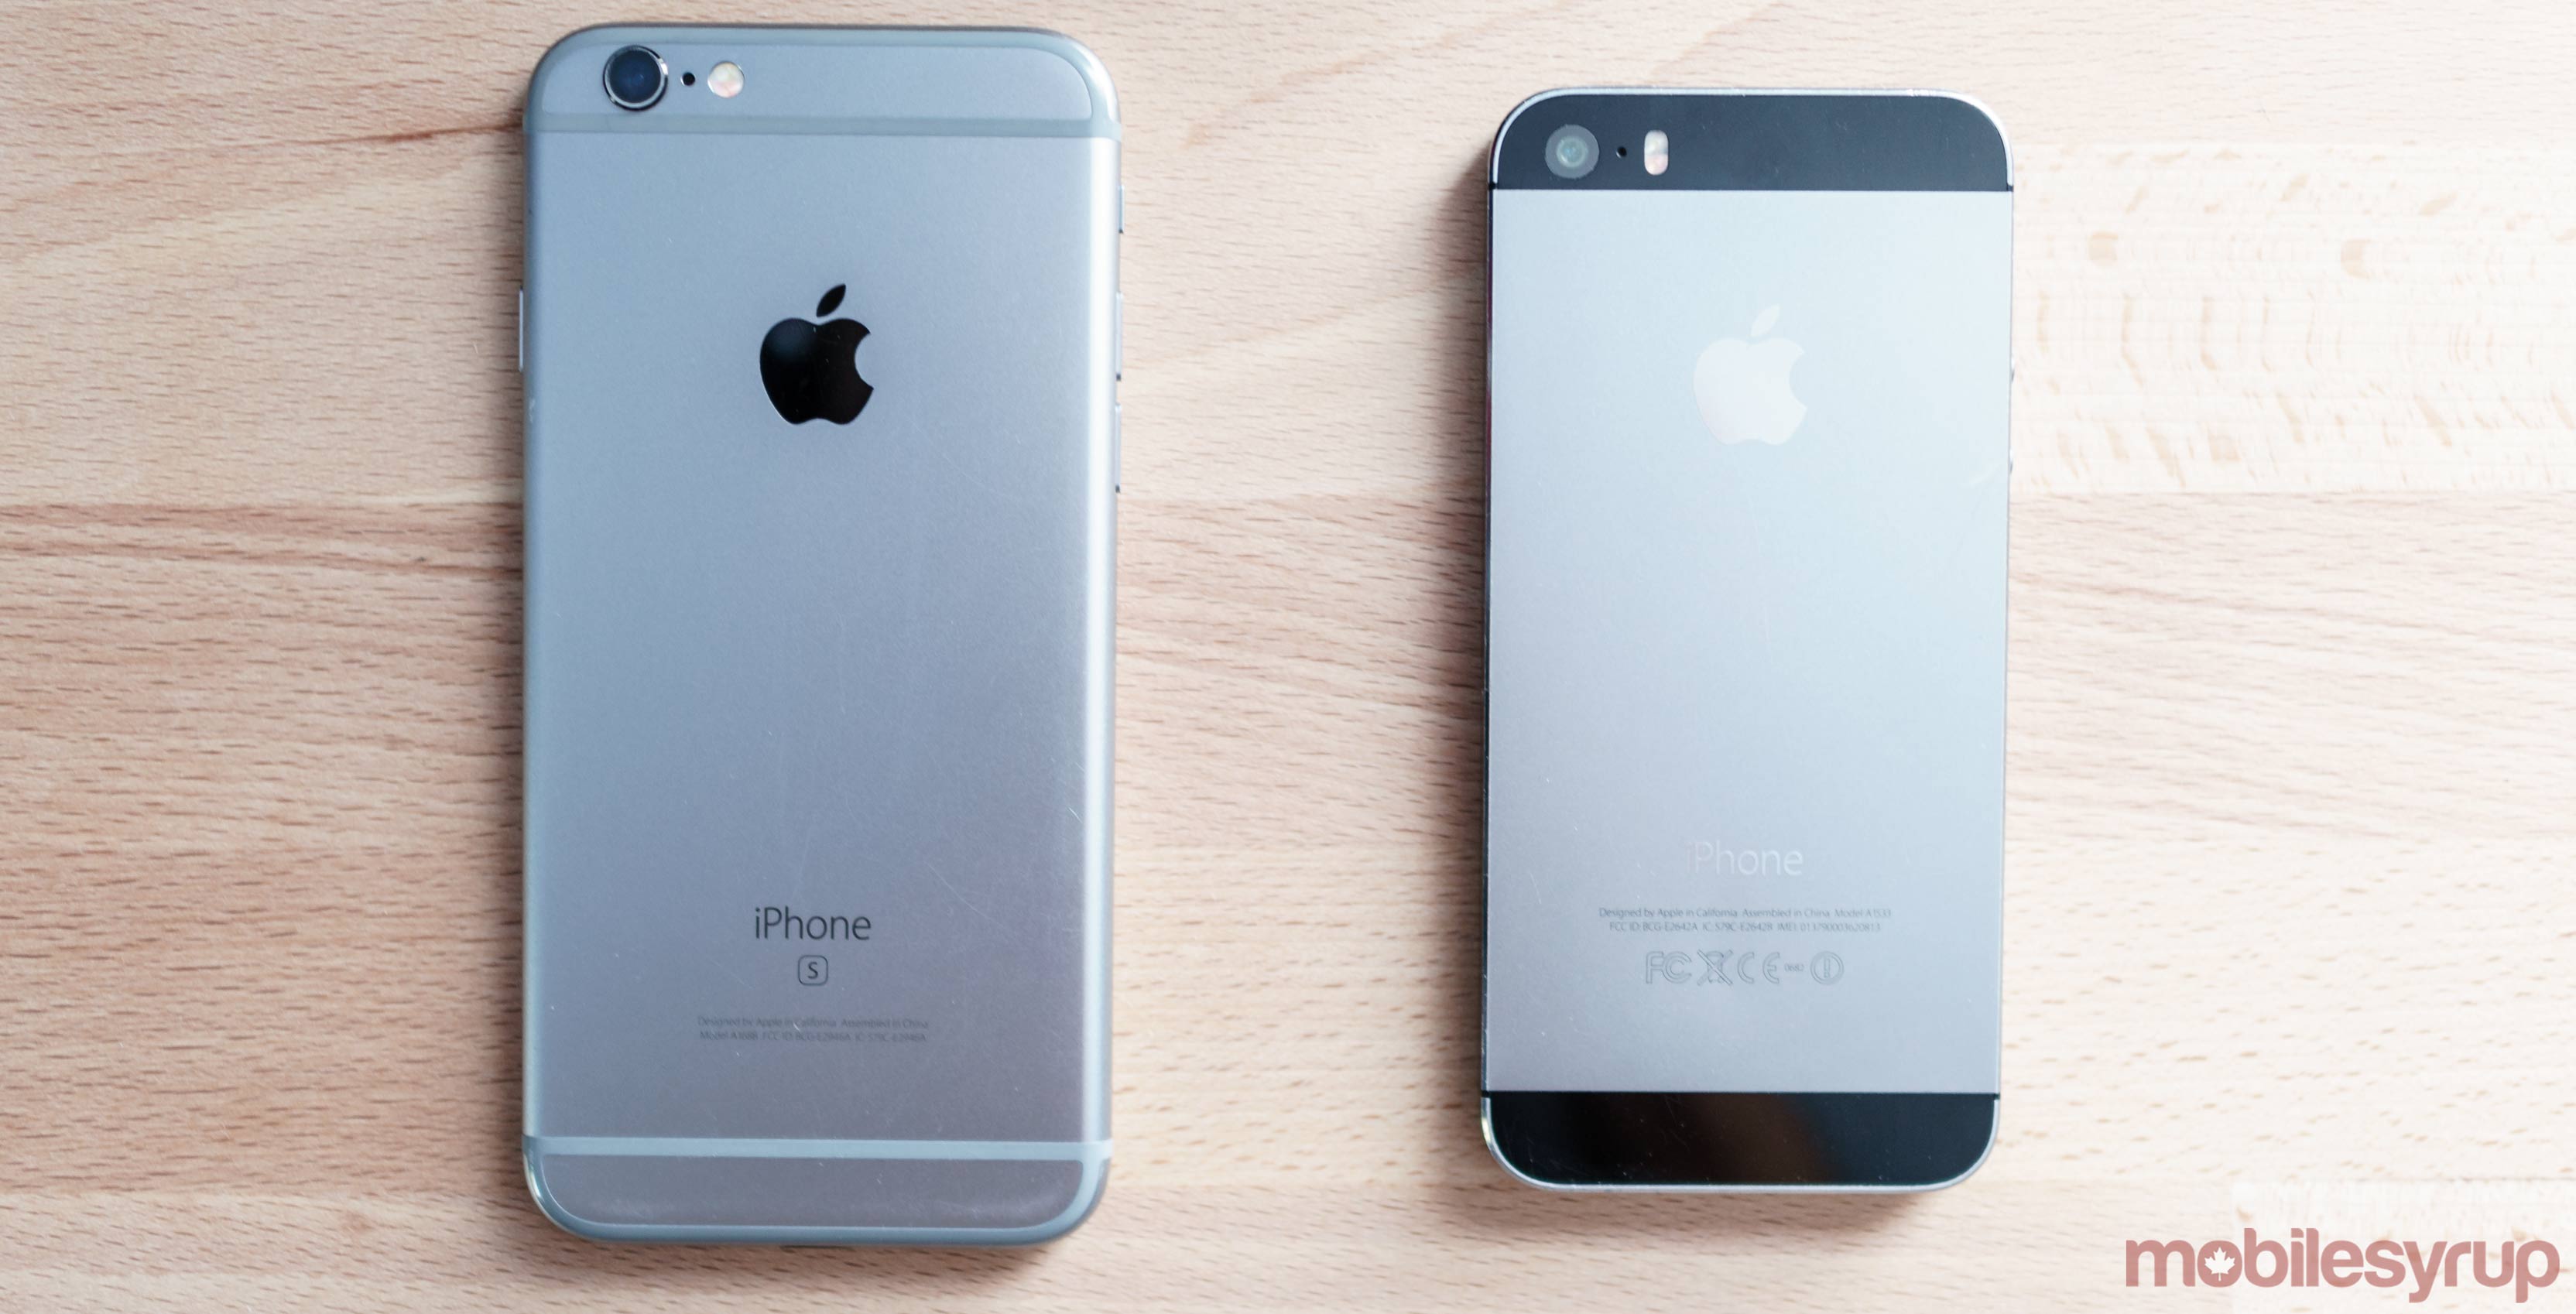 iPhone 5S and iPhone 6S side by side